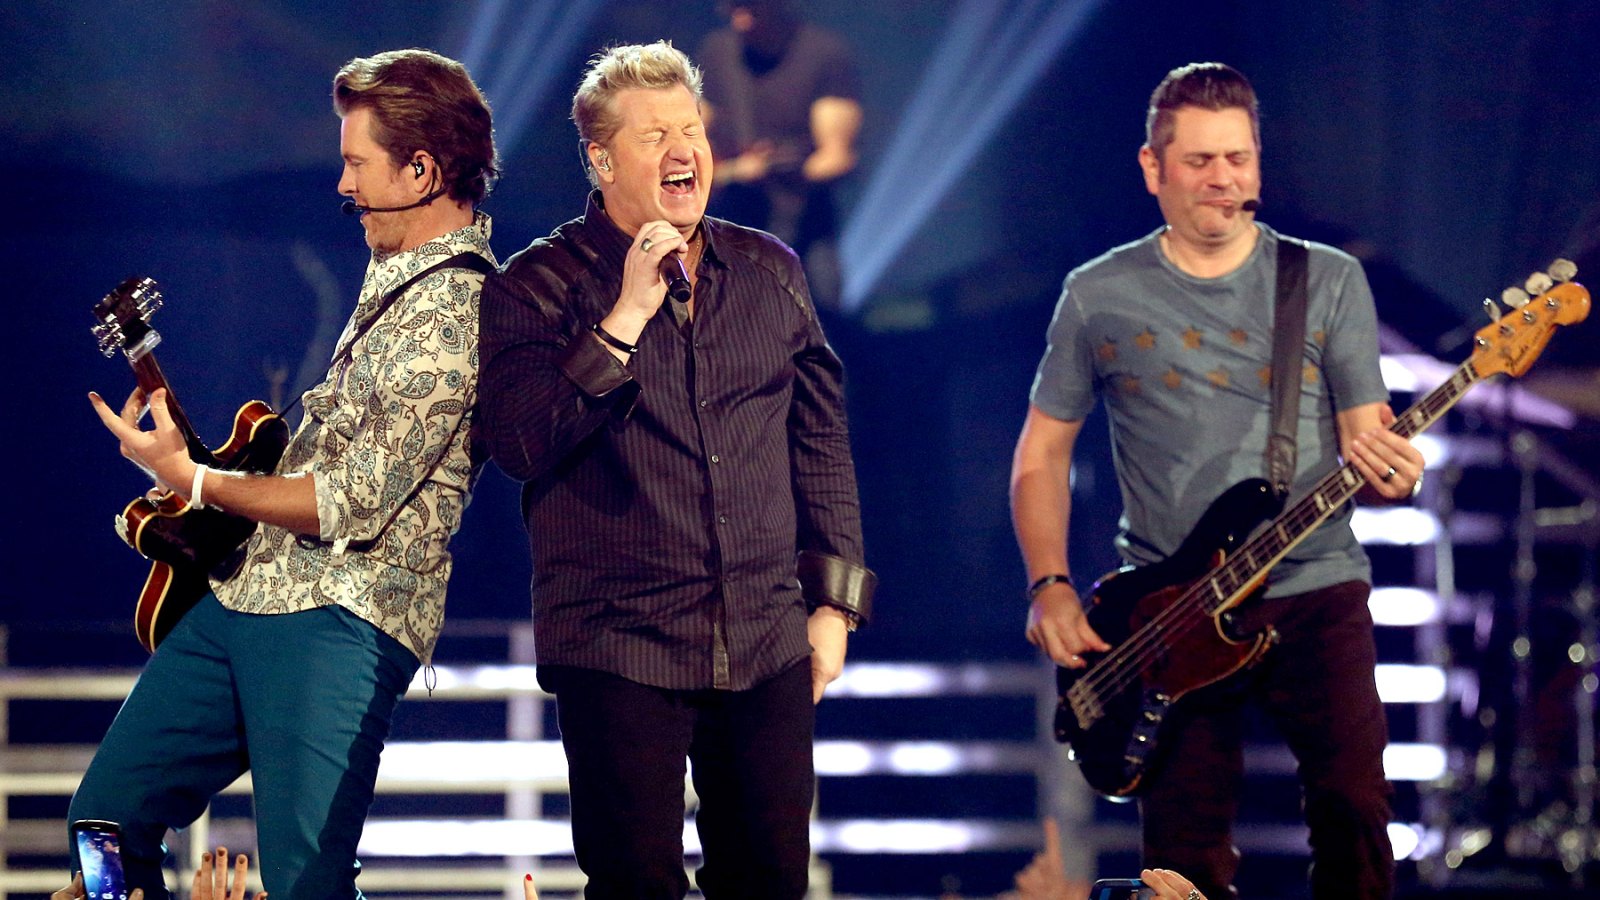 Rascal Flatts perform onstage during the 49th Annual ACM Awards